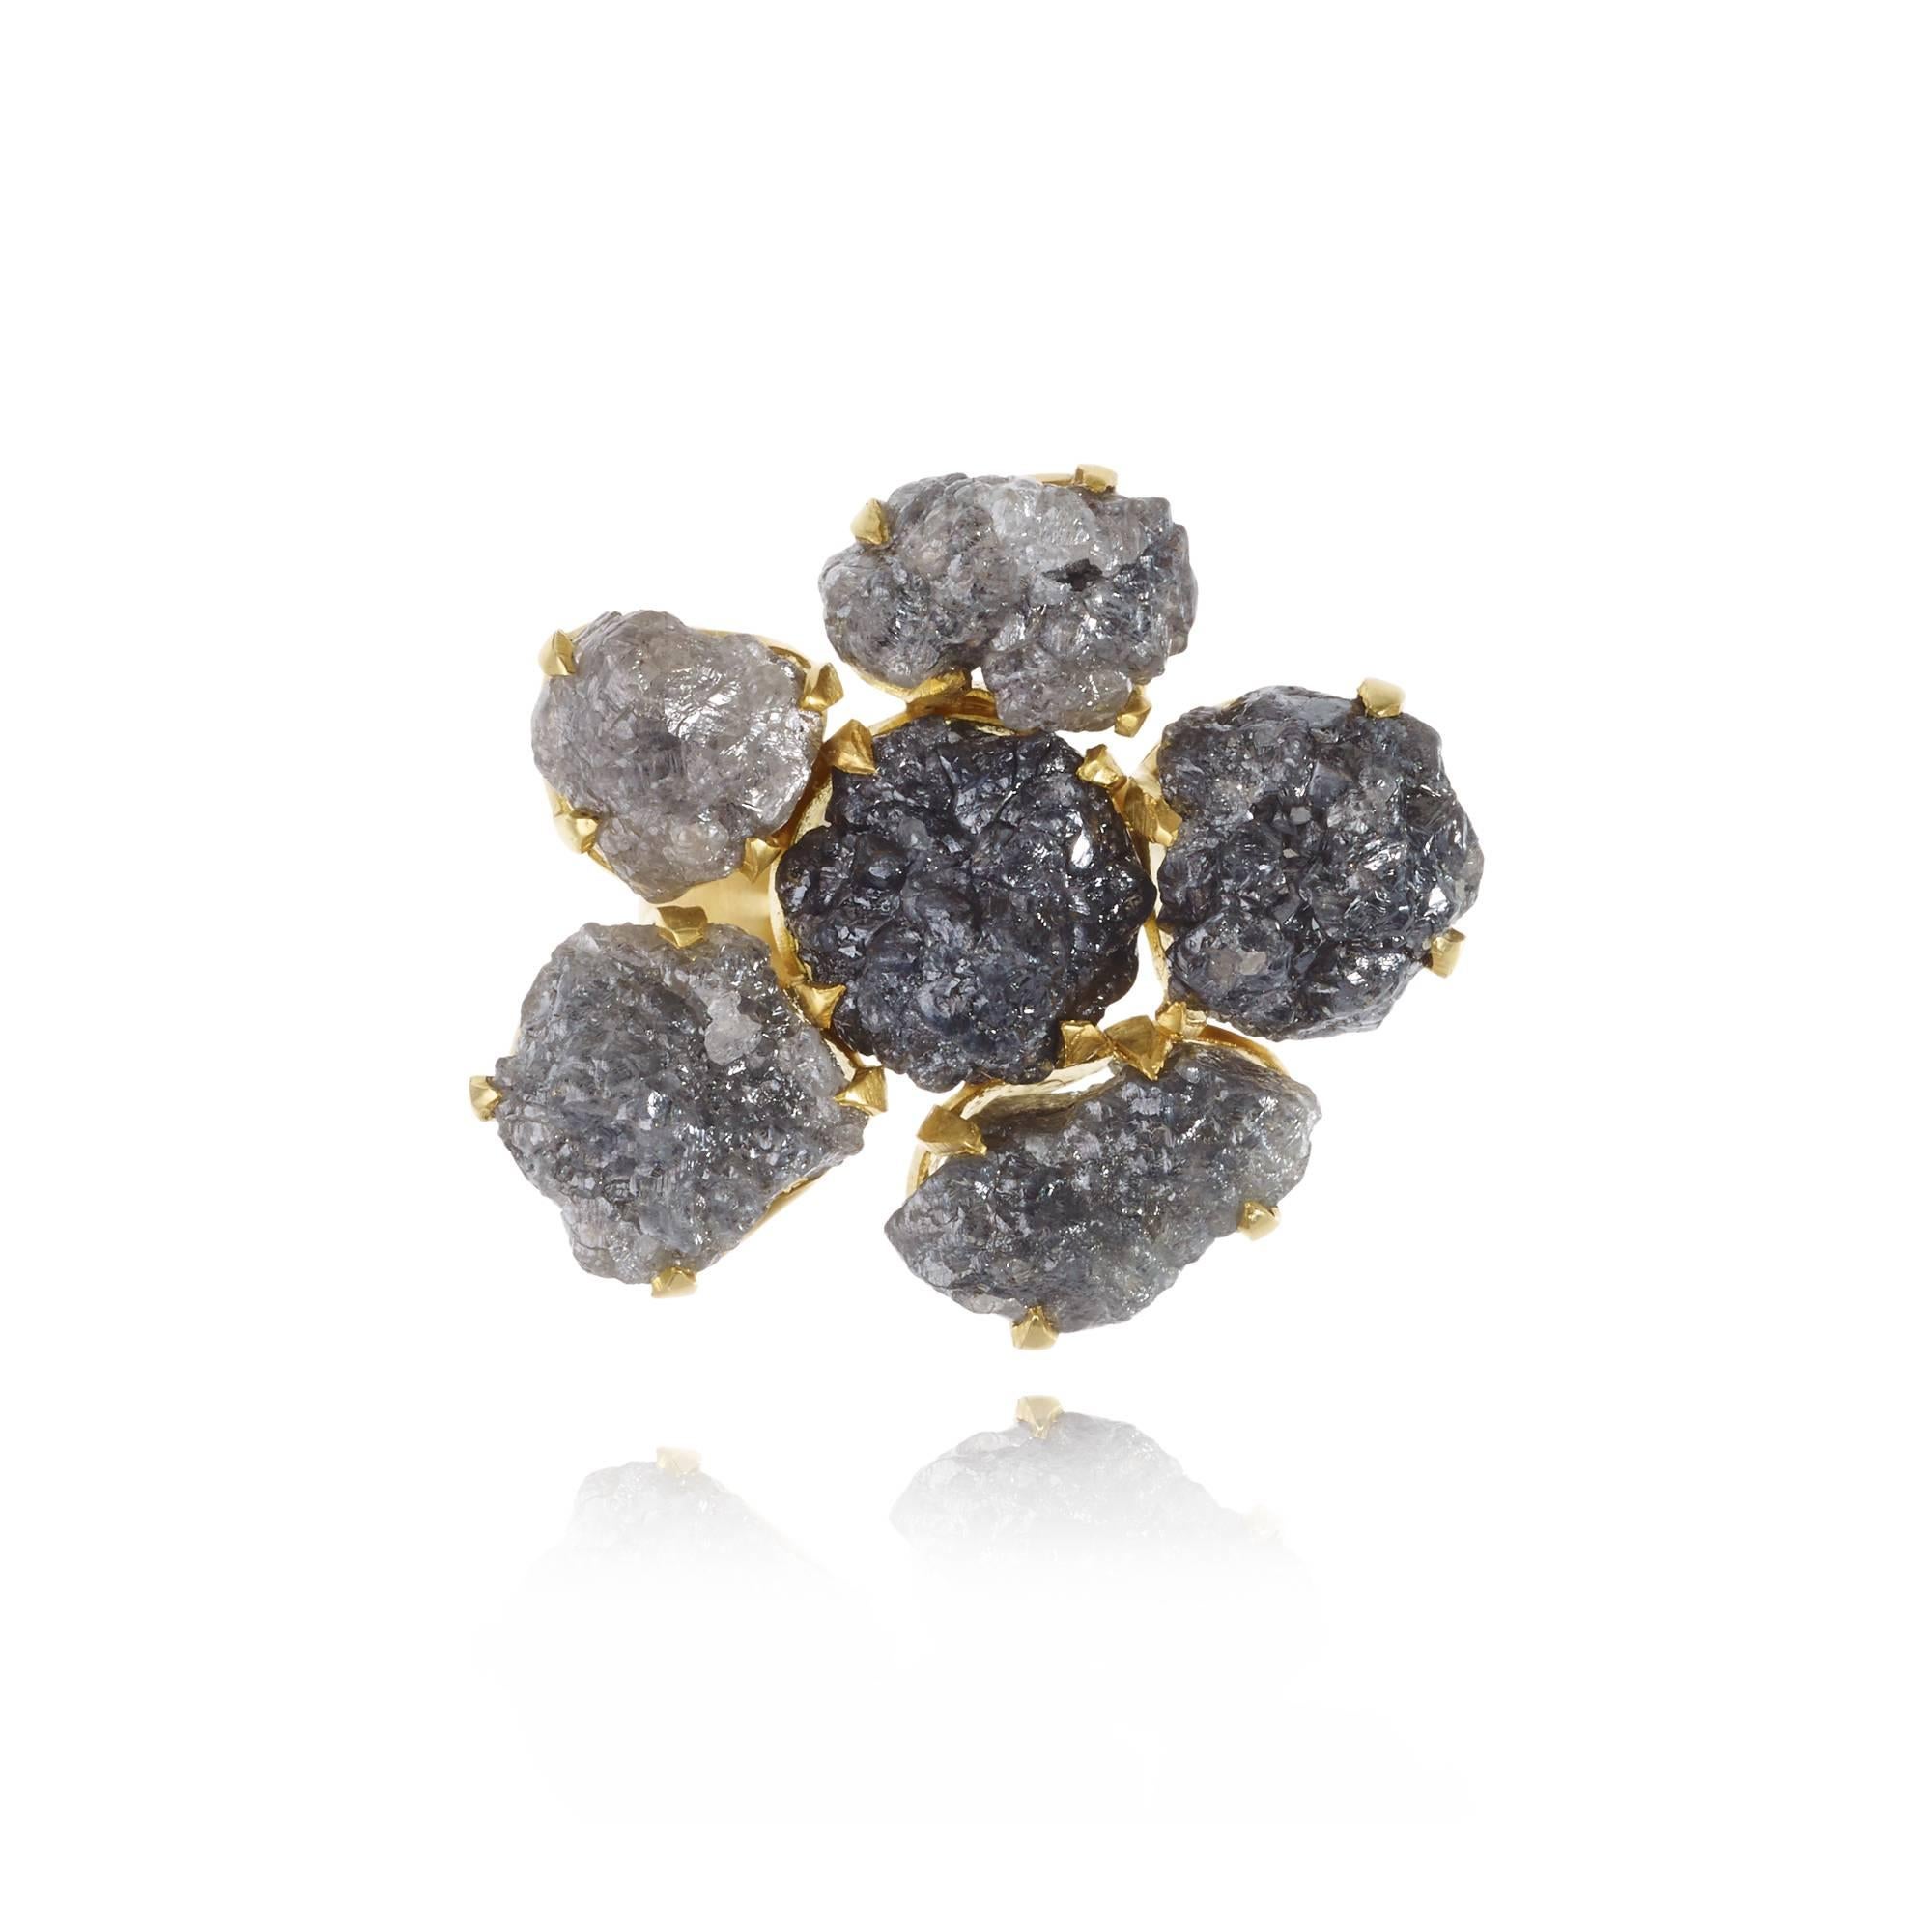 Evoking a quiet glamour of another era, the invisible collection combines the earthiness of uncut stones with the allure of sparkle. Differing from Pippa's traditional colette setting, each rough Diamond featured in this ring is held by a delicate